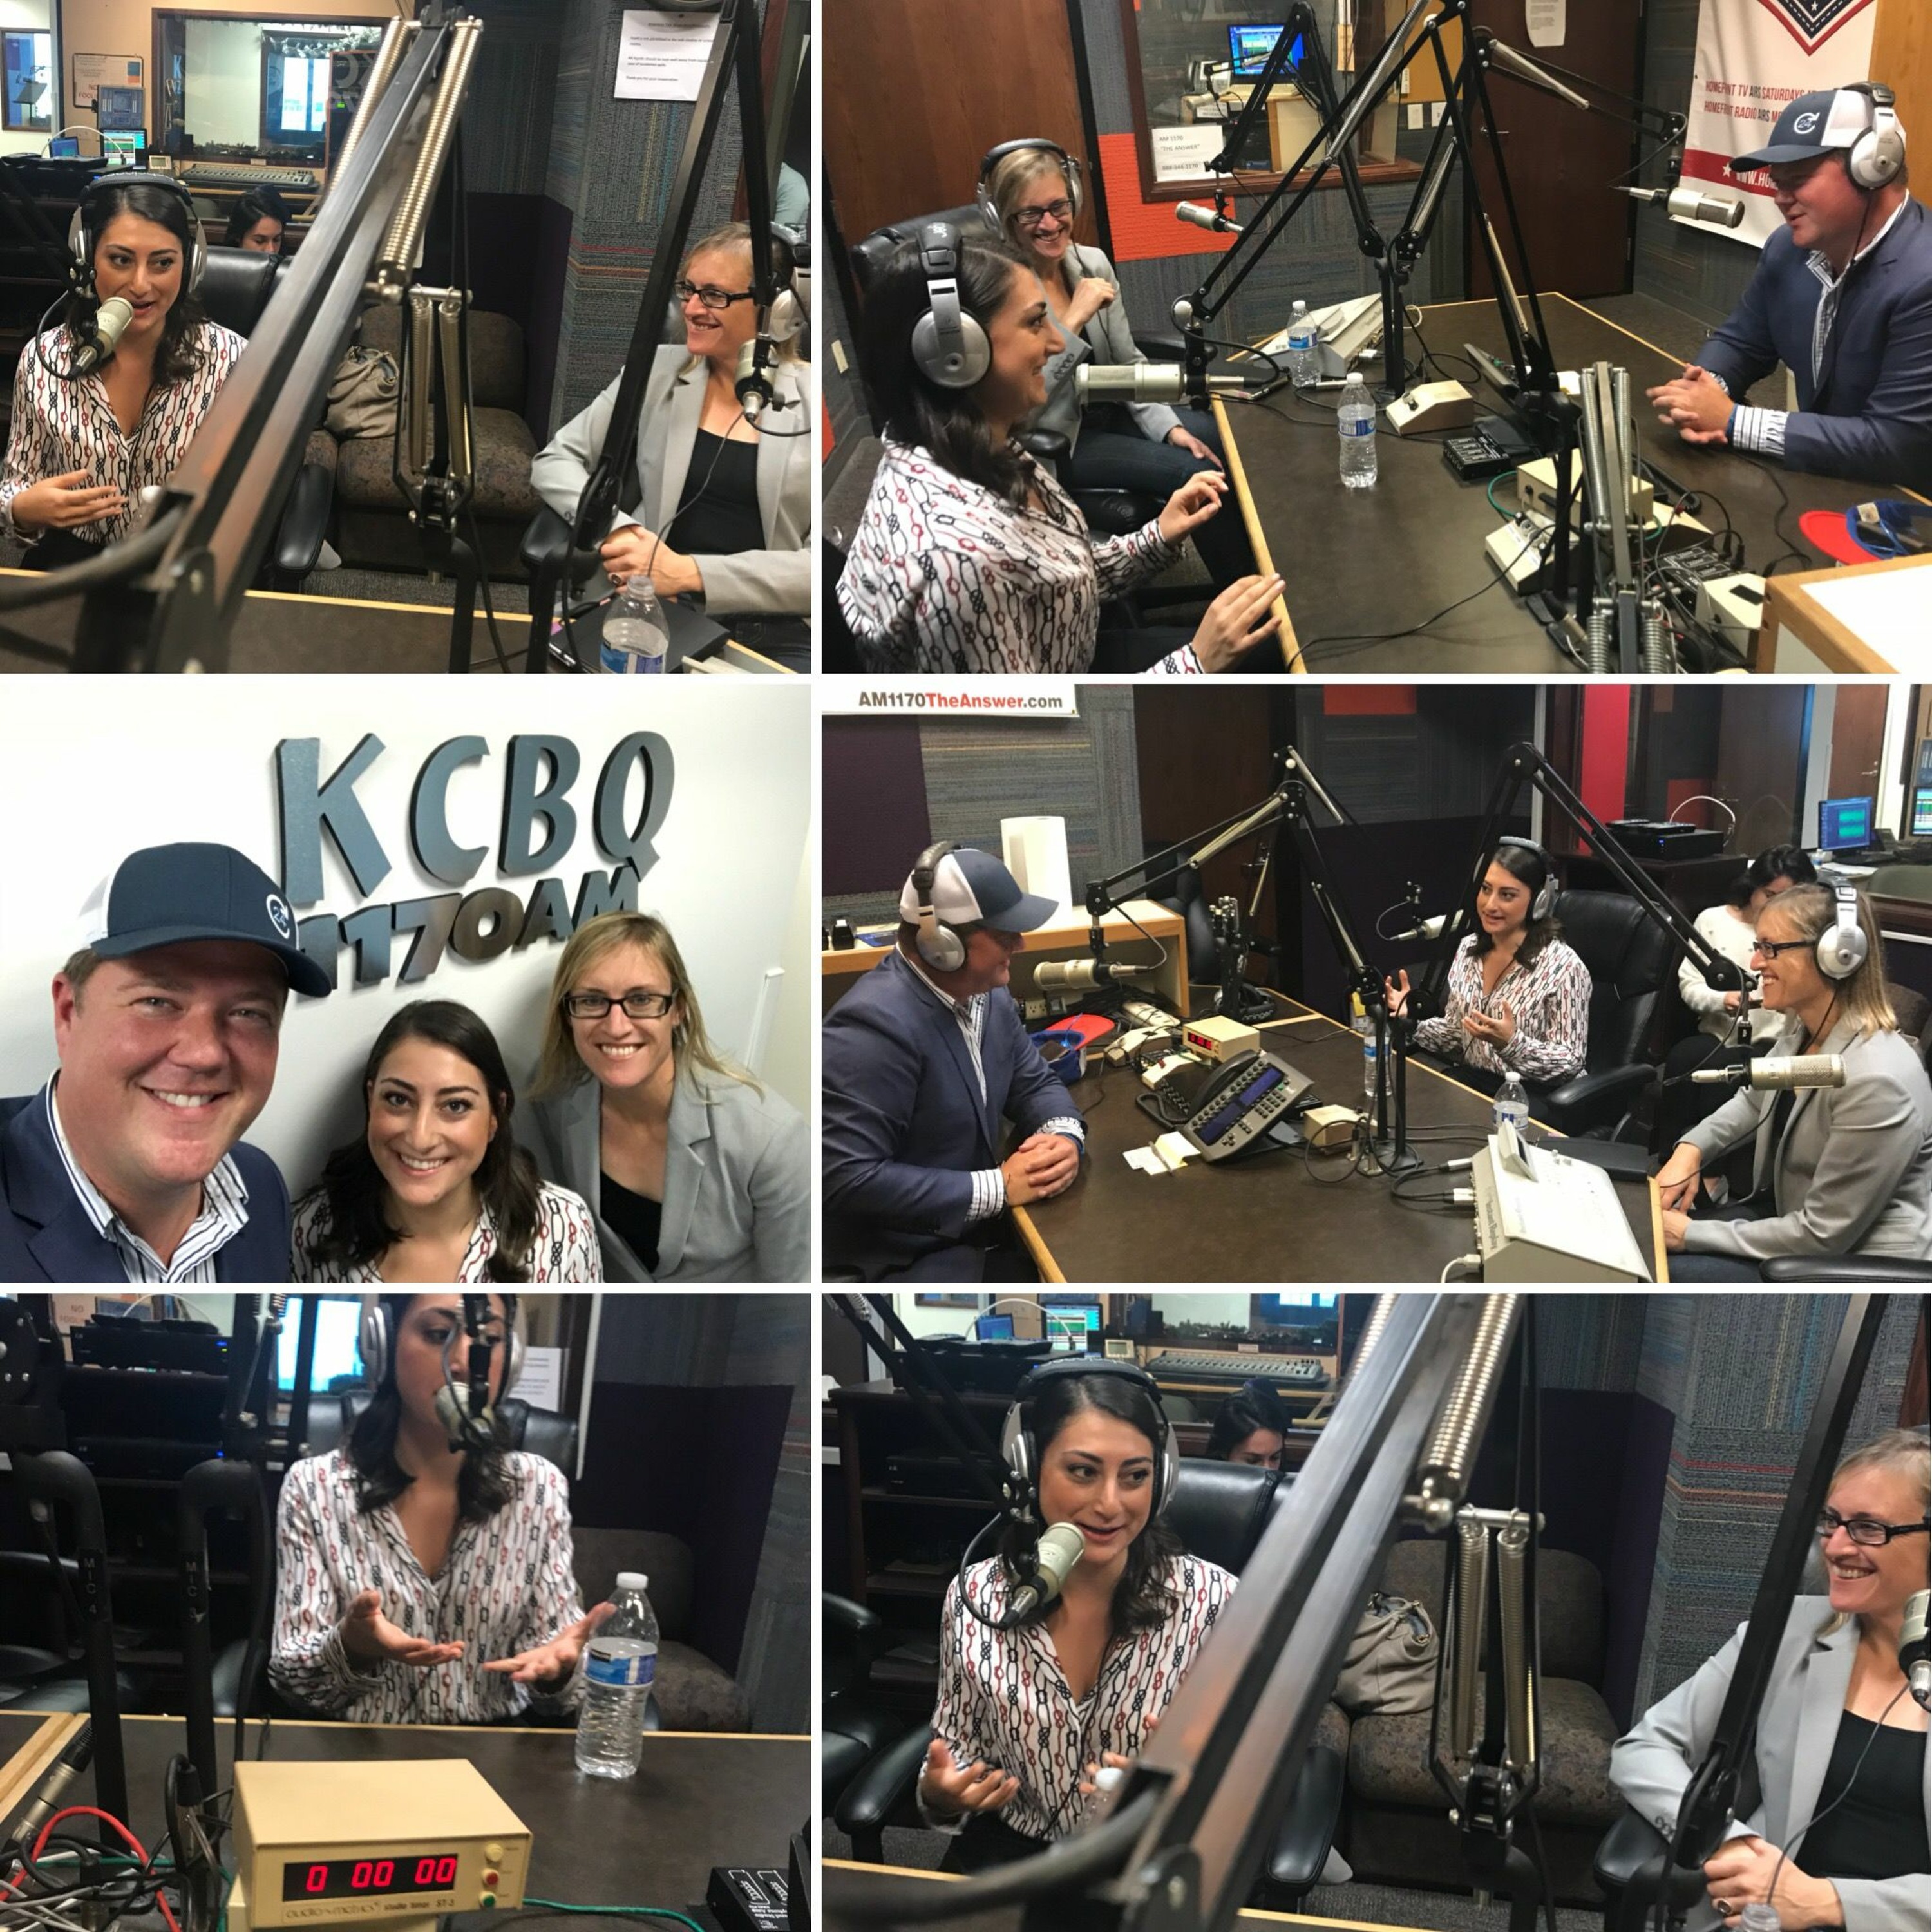 Congressional Candidate Sara Jacobs and Guest Host Carlsbad City Councilwoman Cori Schumacher